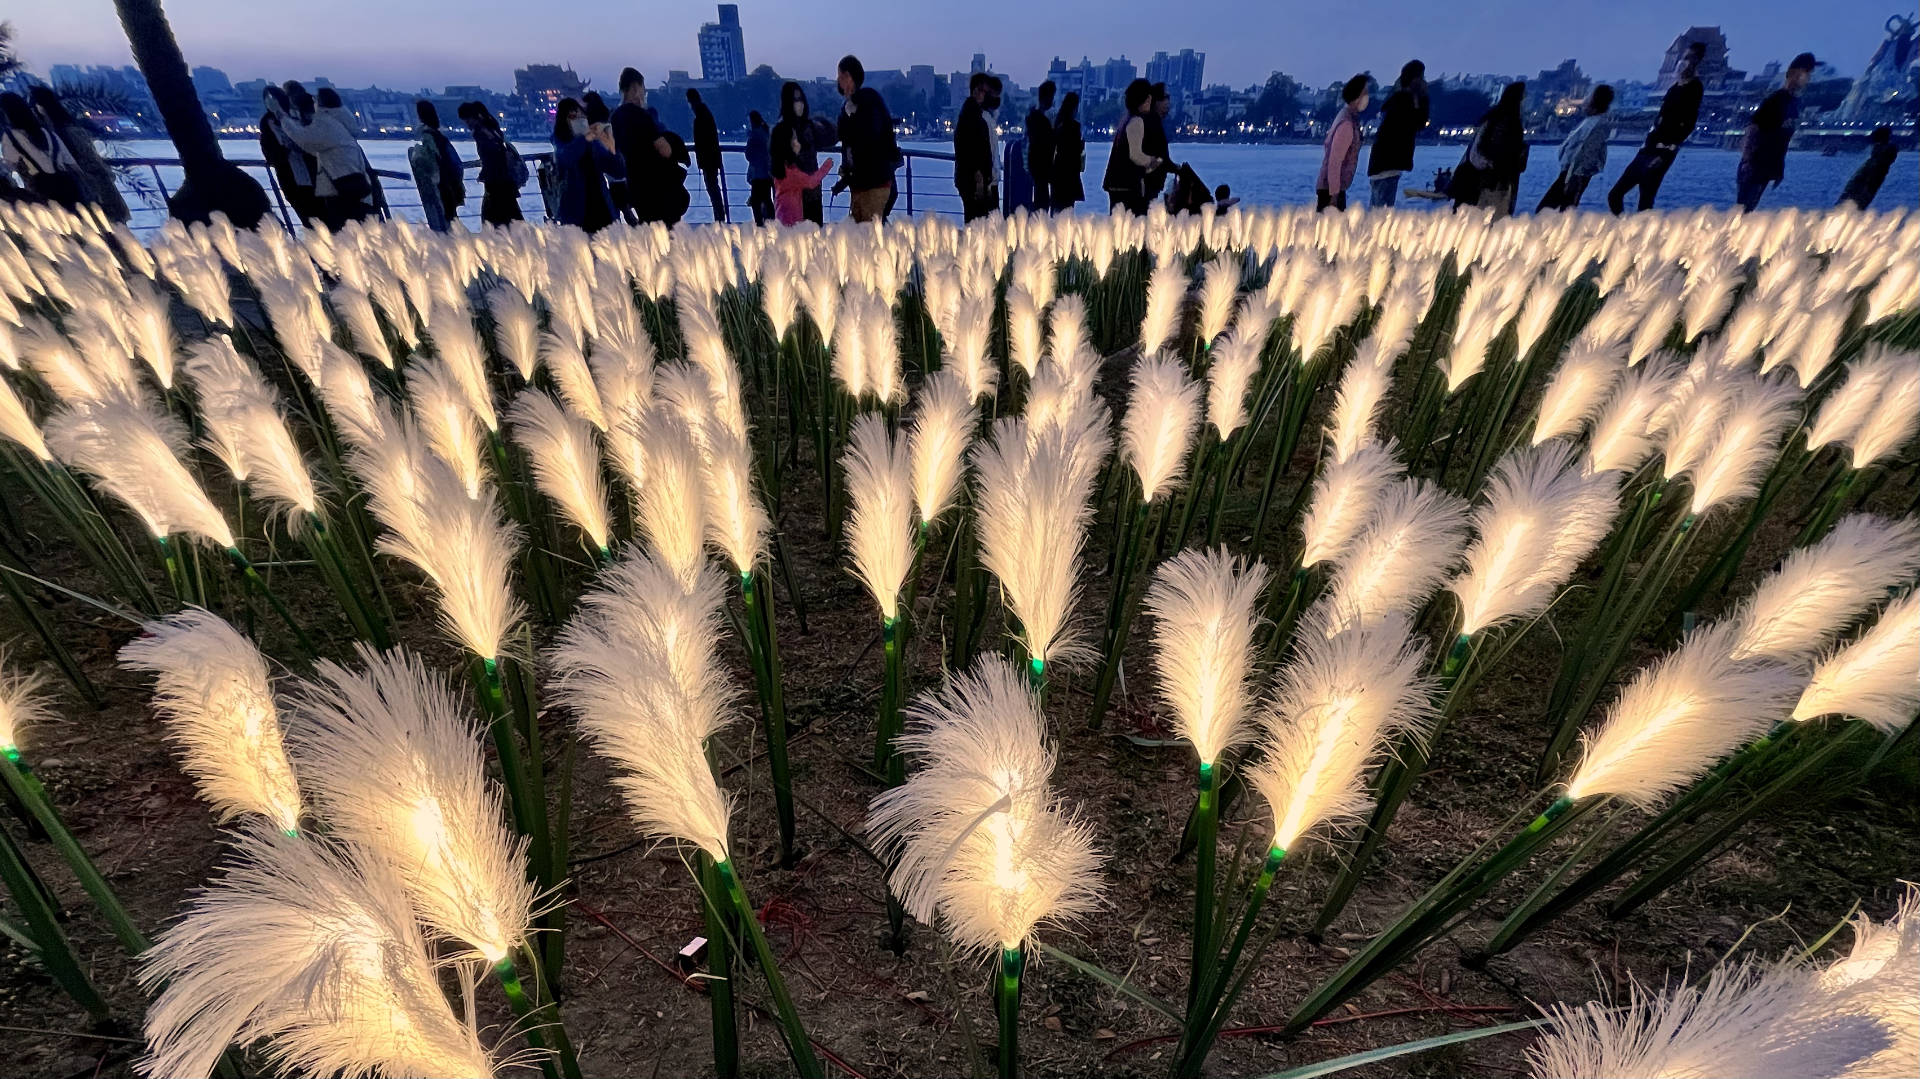 A field of artificial reeds, internally illuminated, with people walking past the lake in the background.